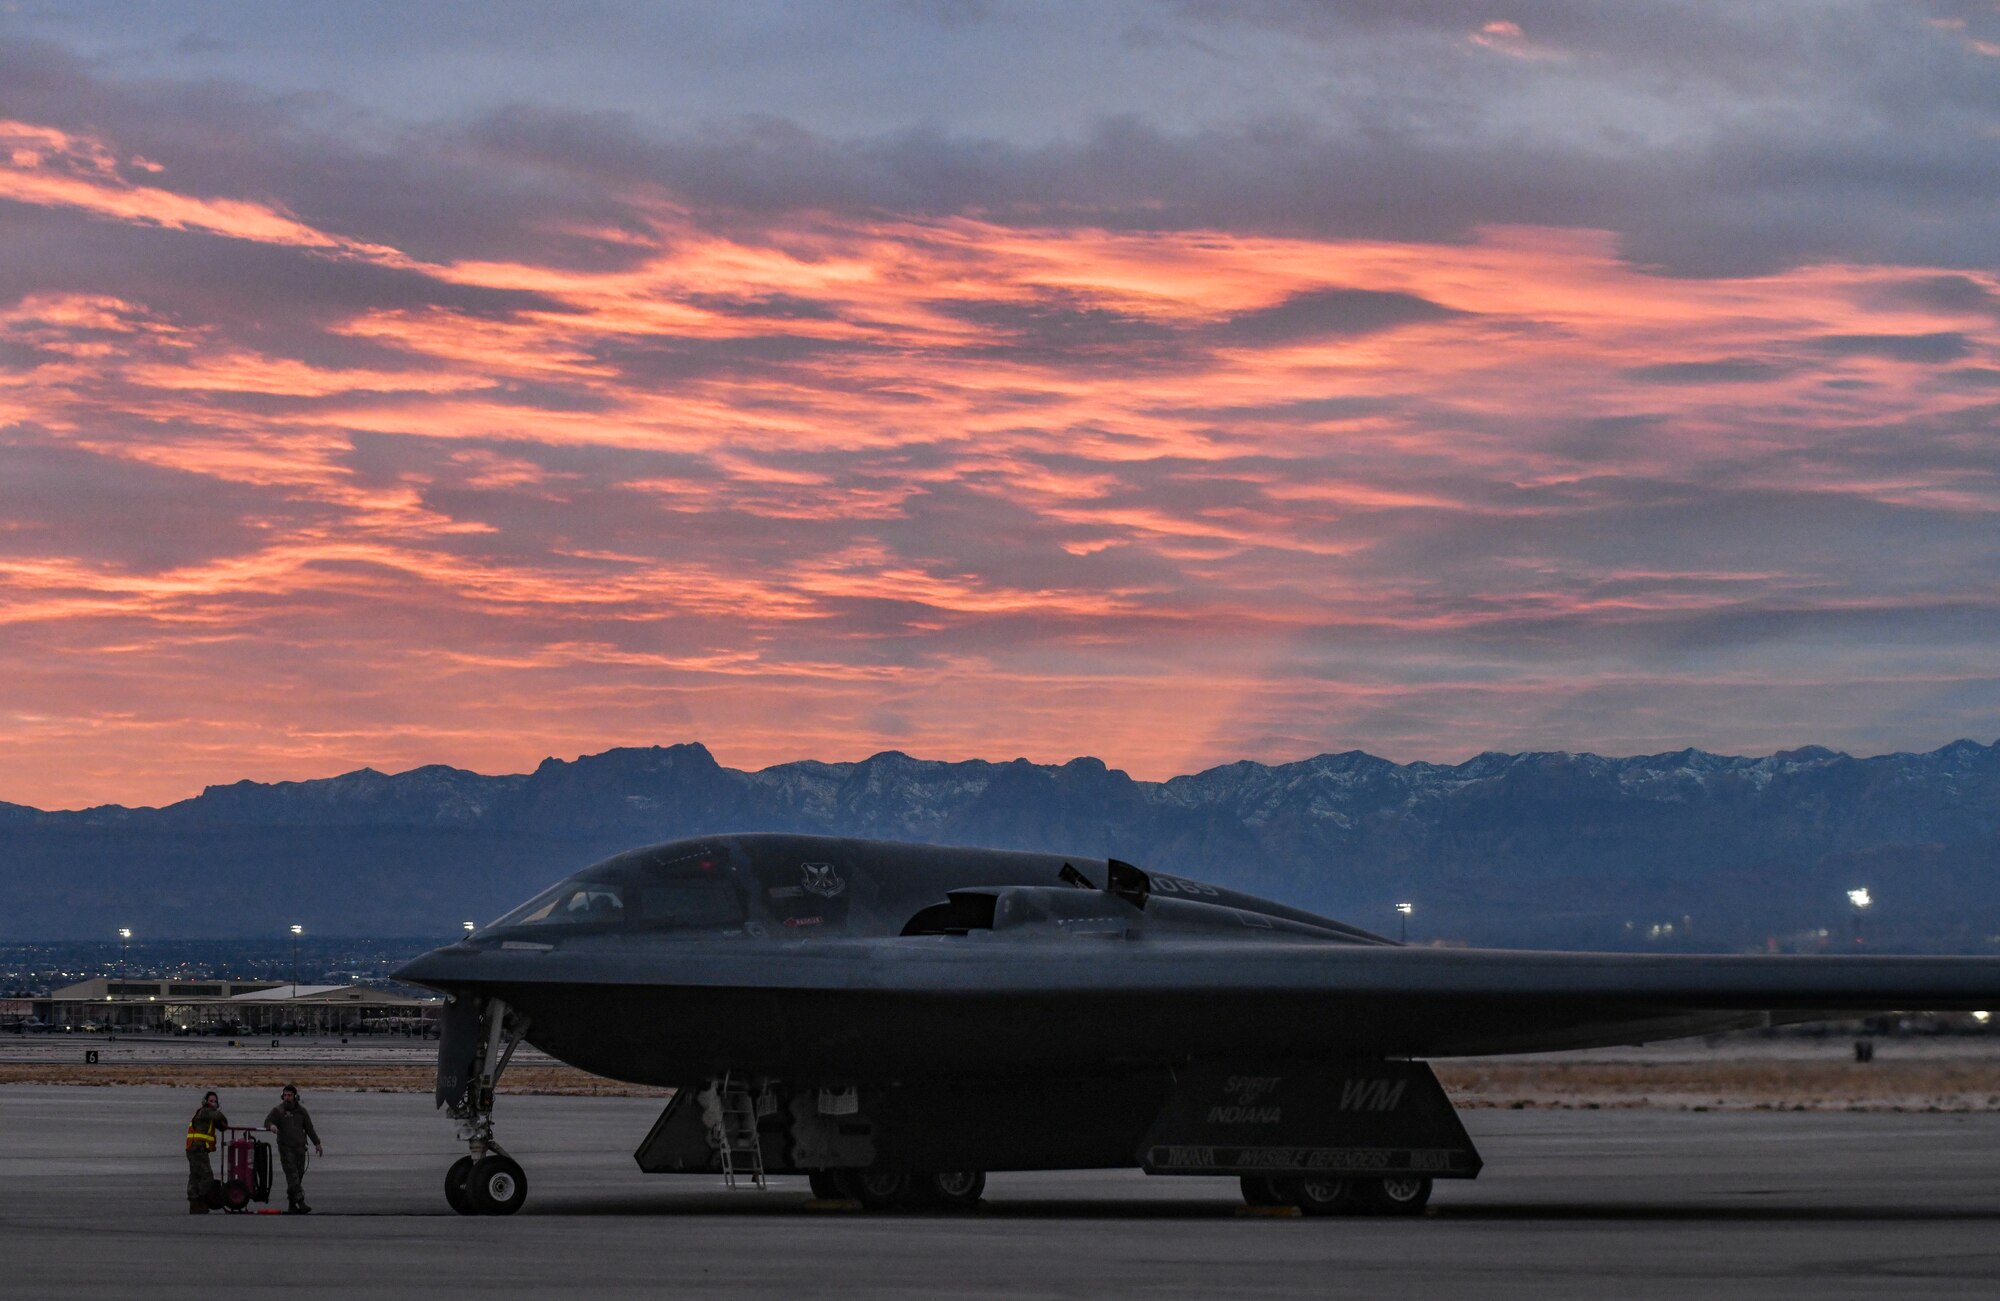 A B-2 Spirit Stealth Bomber sits on a flightline during Red Flag 21-1, Feb. 1, 2021, at Nellis Air Force Base, Nevada. During RF 21-1, the 393rd Expeditionary Bomb Squadron flew approximately 60 B-2 Spirit Stealth Bomber training missions with multiple aircraft in order to further enhance their experience for future sorties. Aircrews rotated their mission duties throughout the large-force exercise, expanding their ability to plan and execute operations best fit for various contingency scenarios. (U.S. Air Force photo by Staff Sgt. Sadie Colbert)